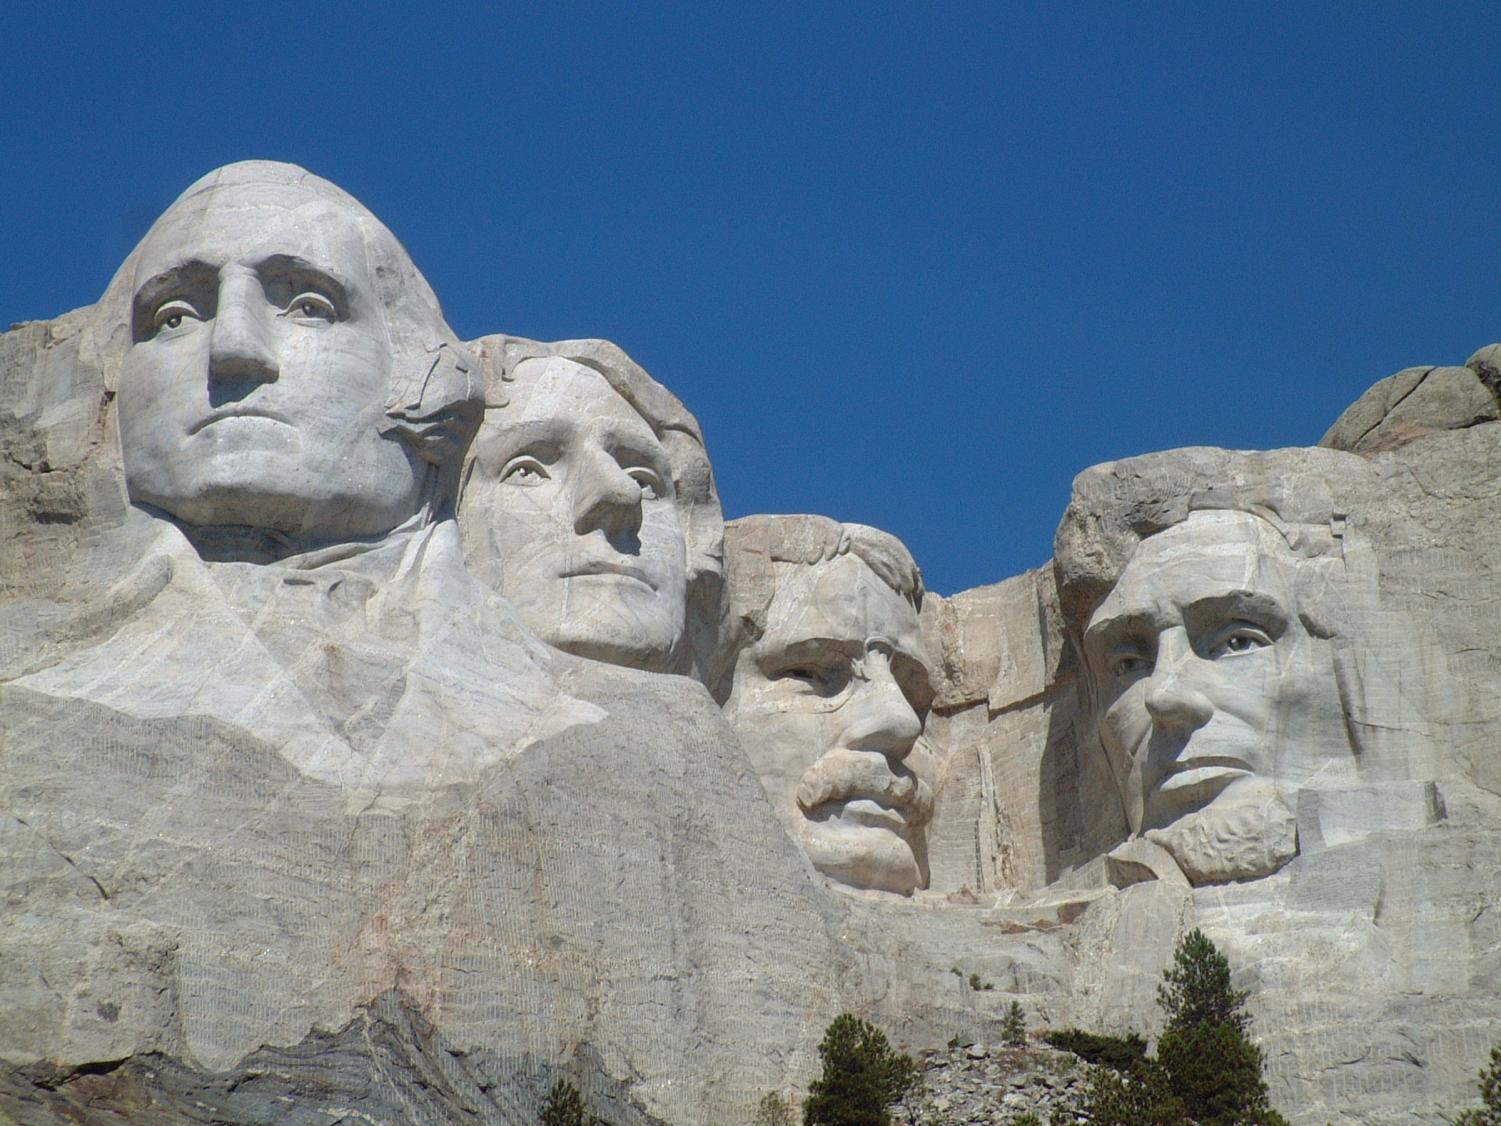 For the Sioux, Mount Rushmore is a grand yet painful reminder of the desecration of their people and their culture.